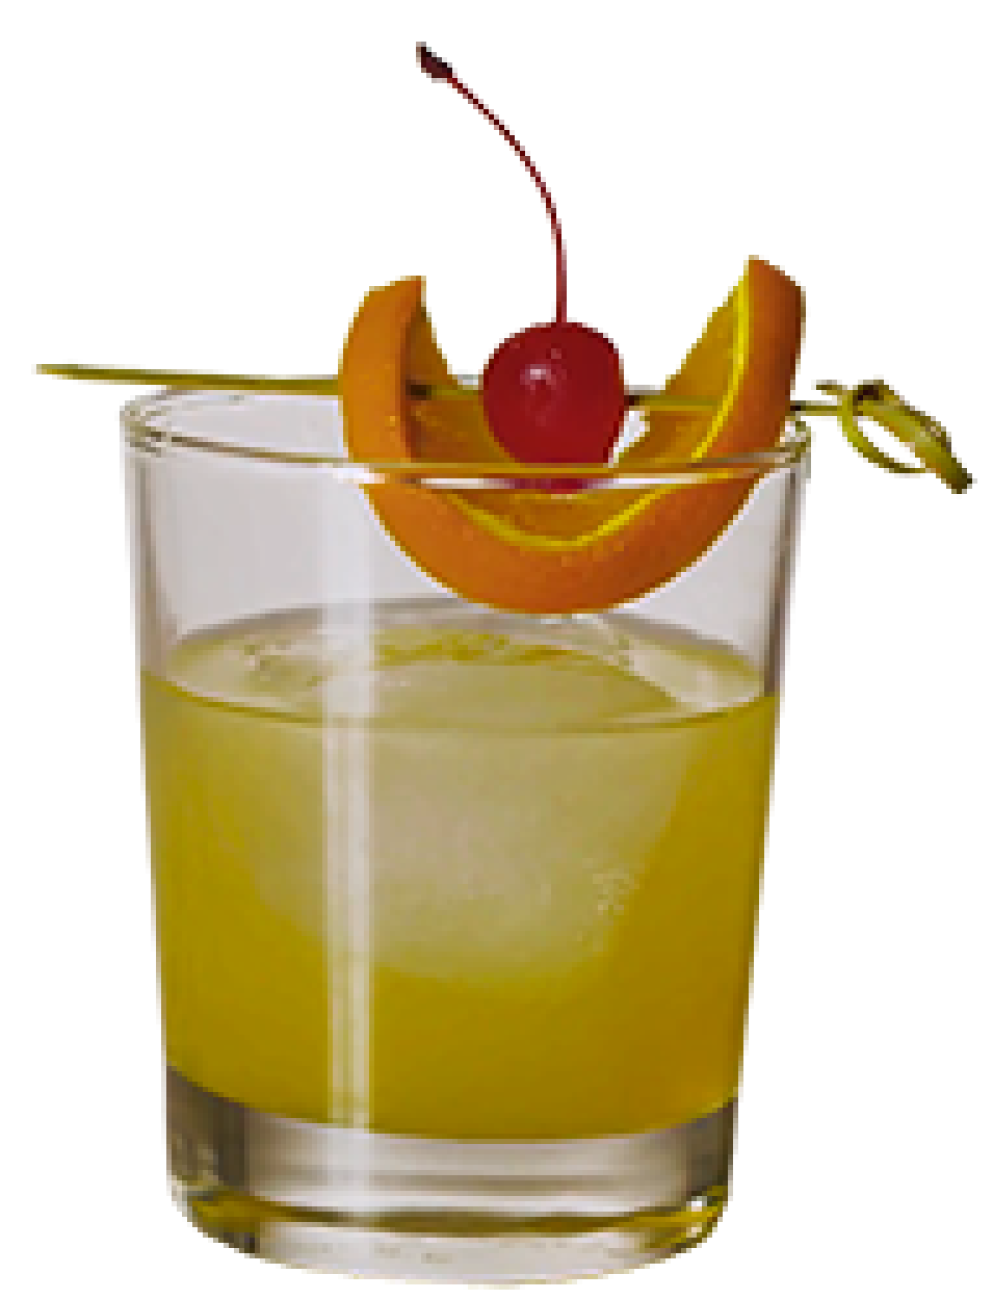 Low ball glass with a Whisky Sour garnished with a cherry and orange slice